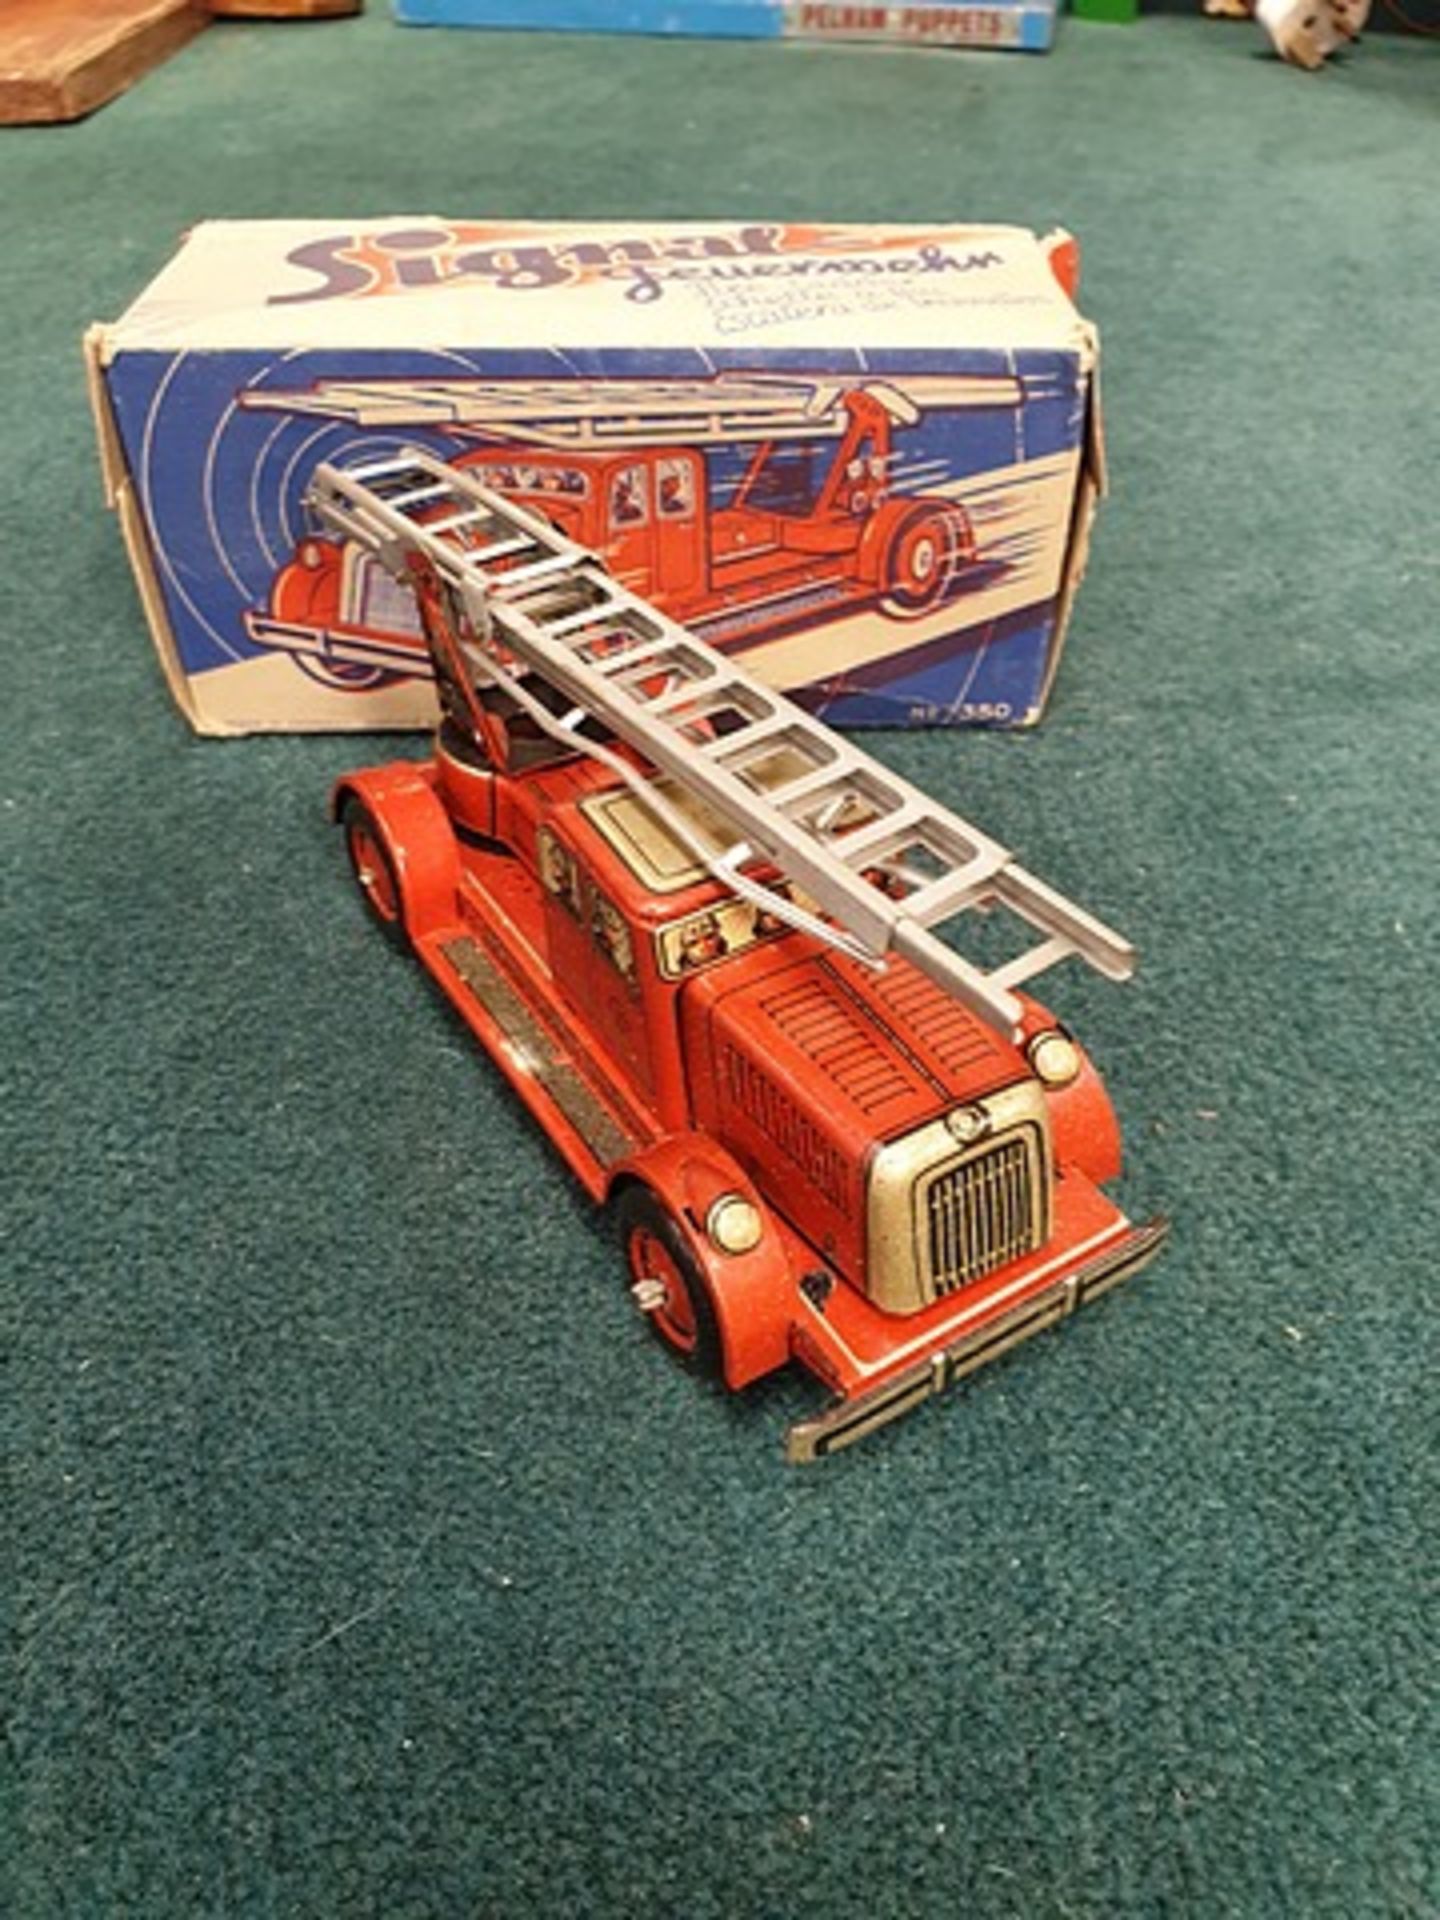 CKO #350 Signal Tin Lithographed Wind-Up Fire Engine Ladder Truck Complete With Box